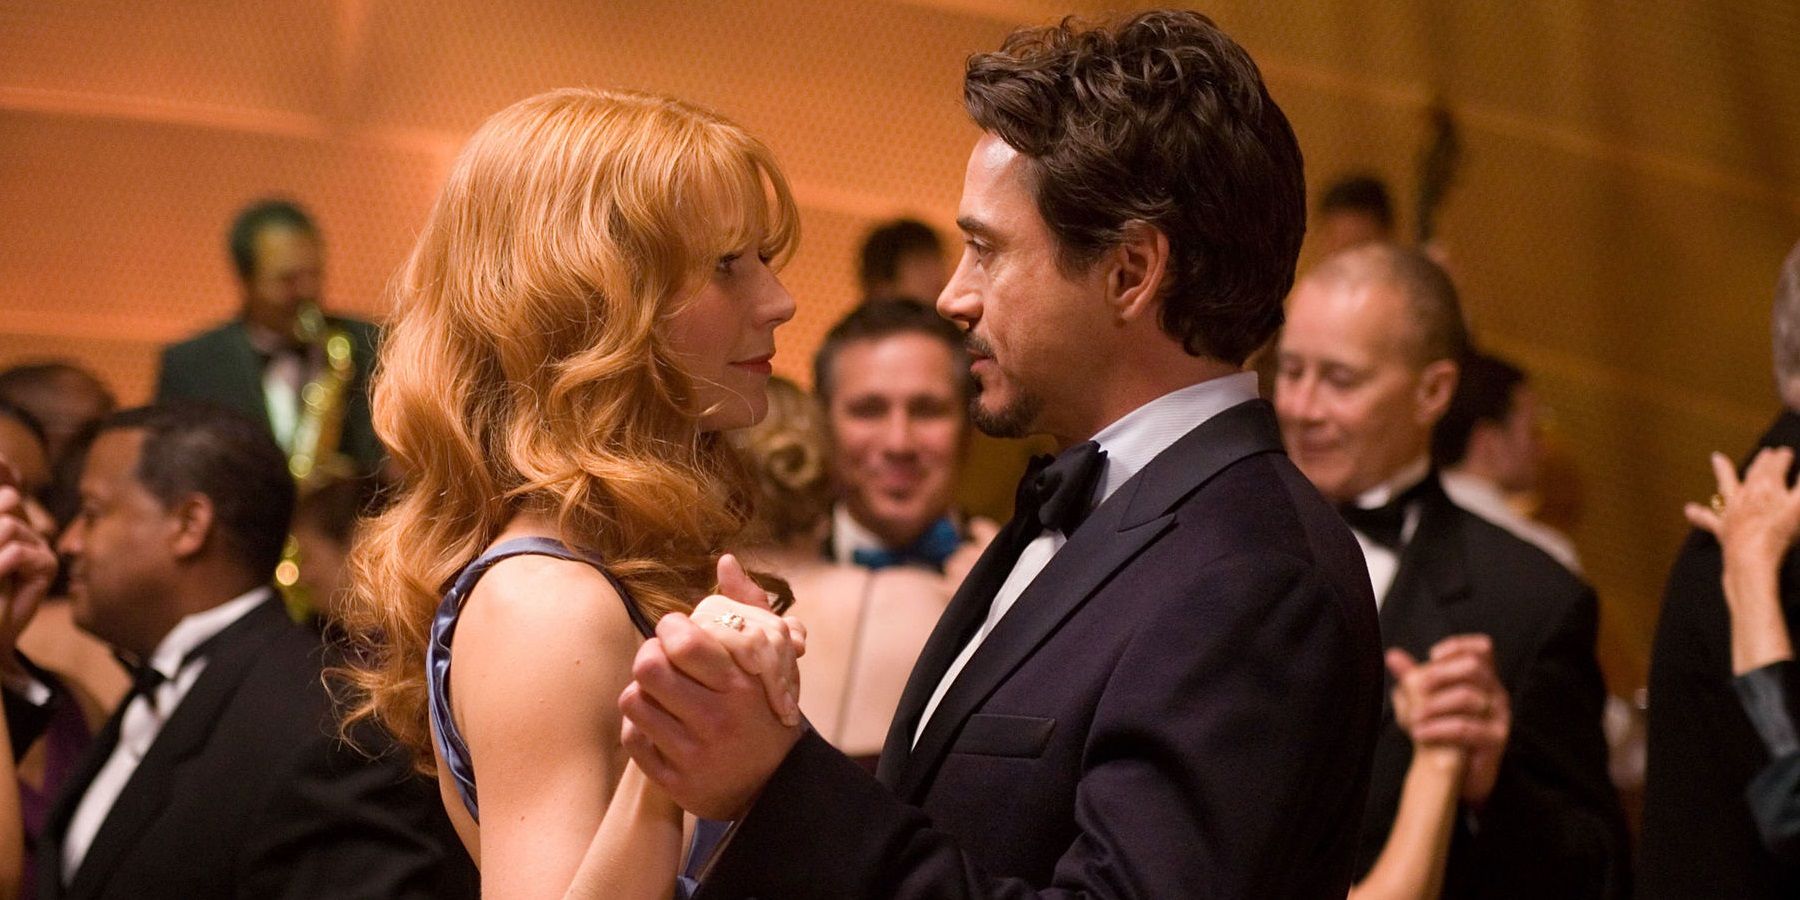 Tony Stark and Pepper Potts dancing in Iron Man